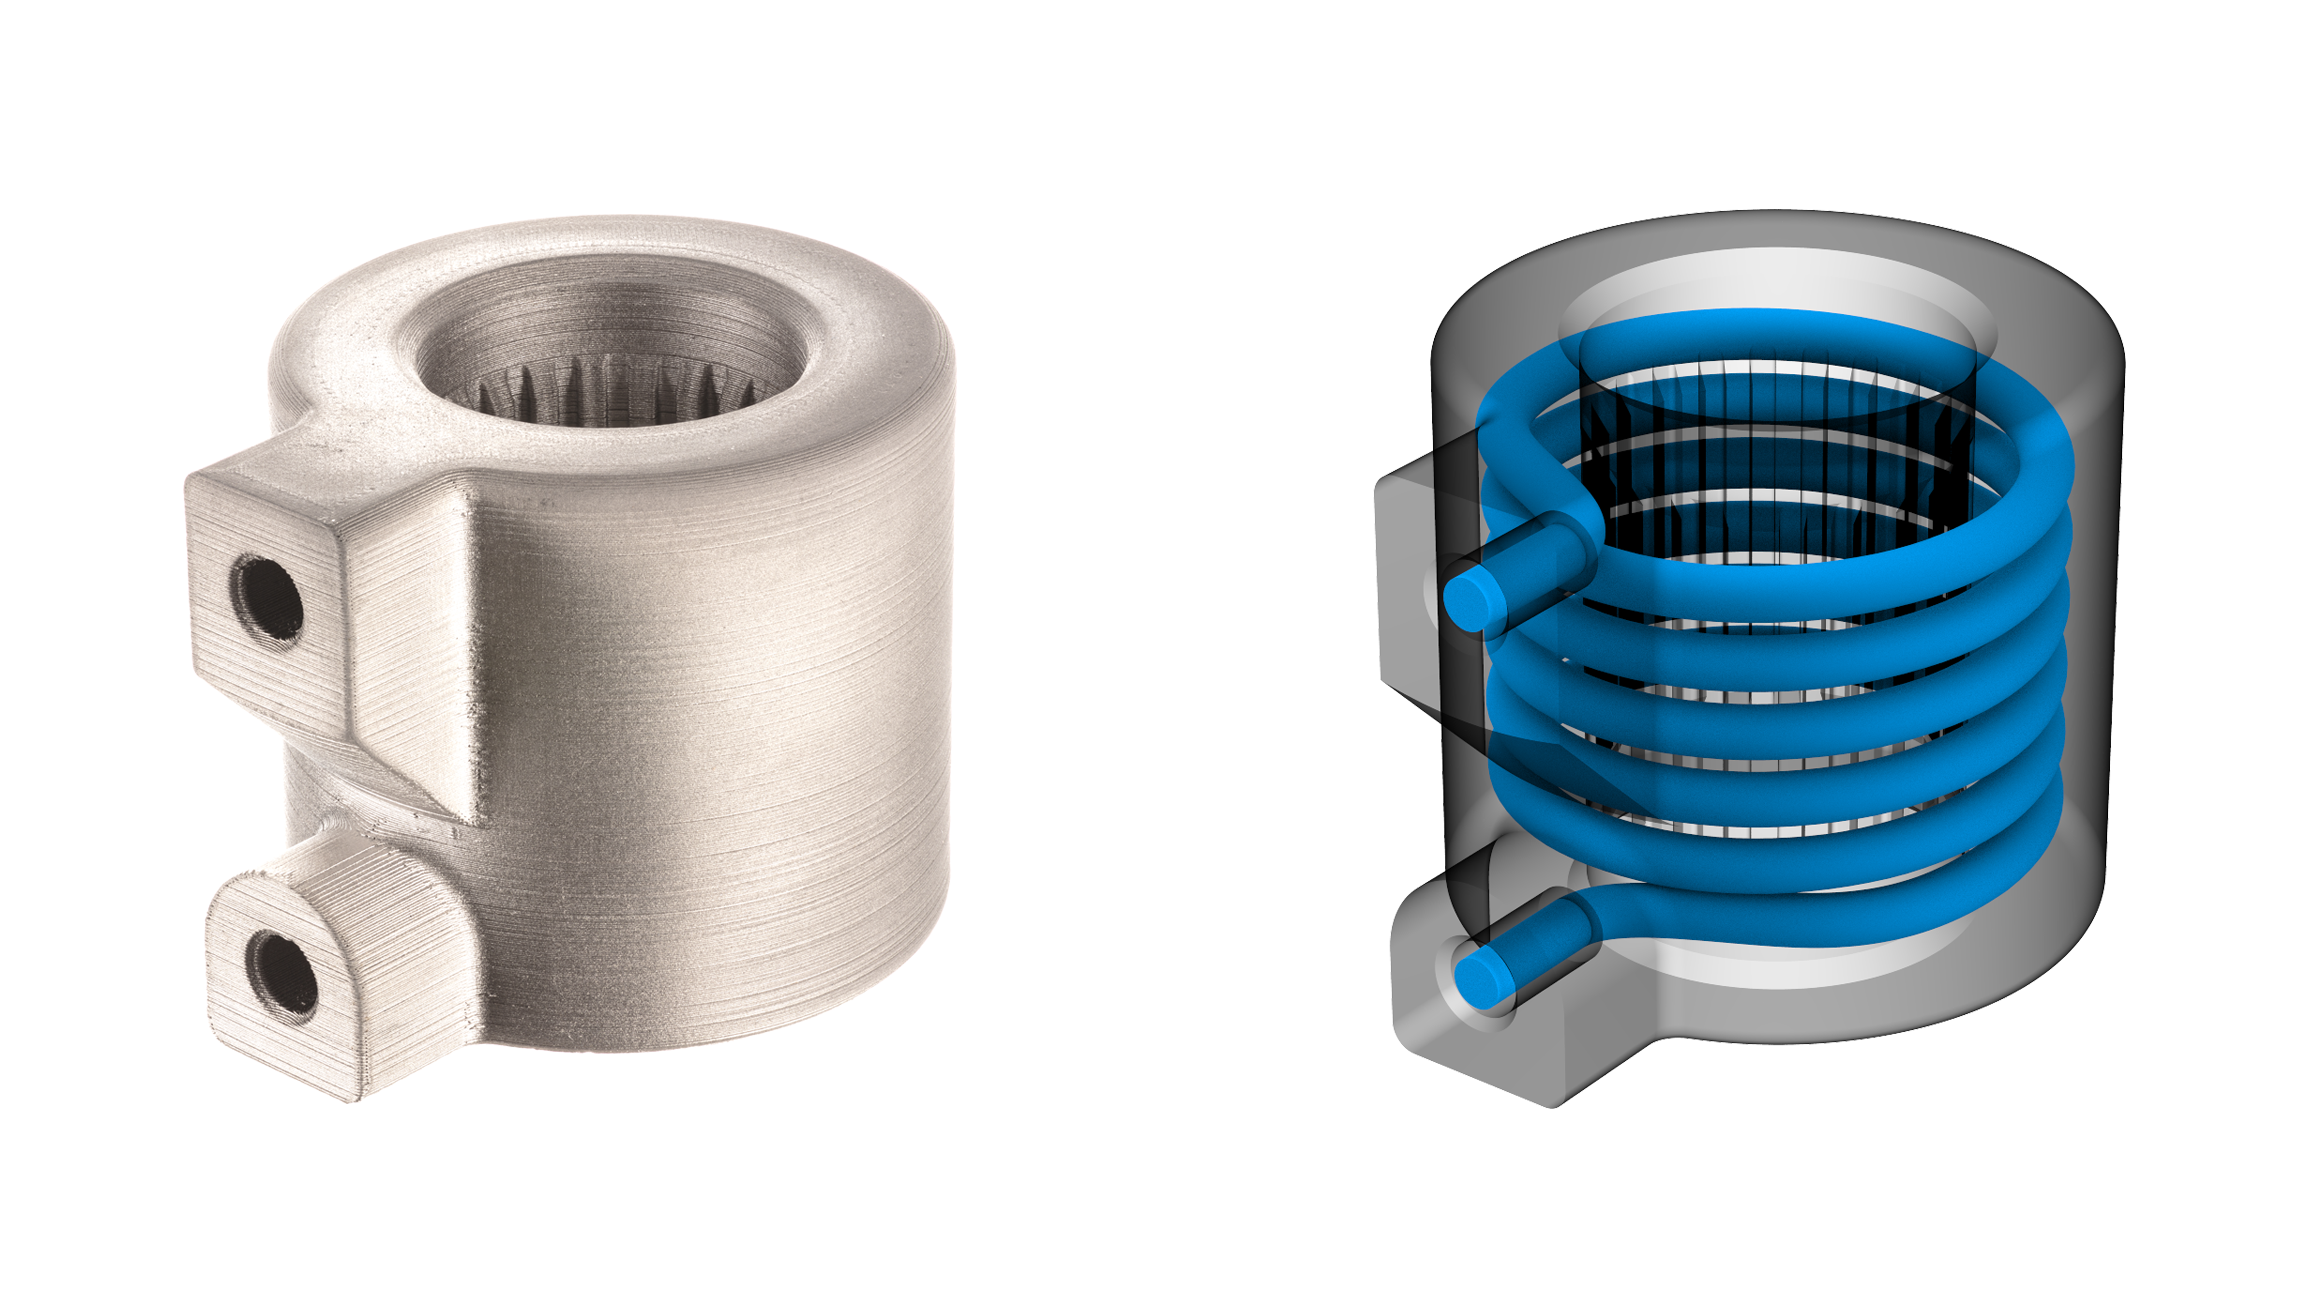 Additive manufacturing allows for non-planar internal channels to be built directly into the part.